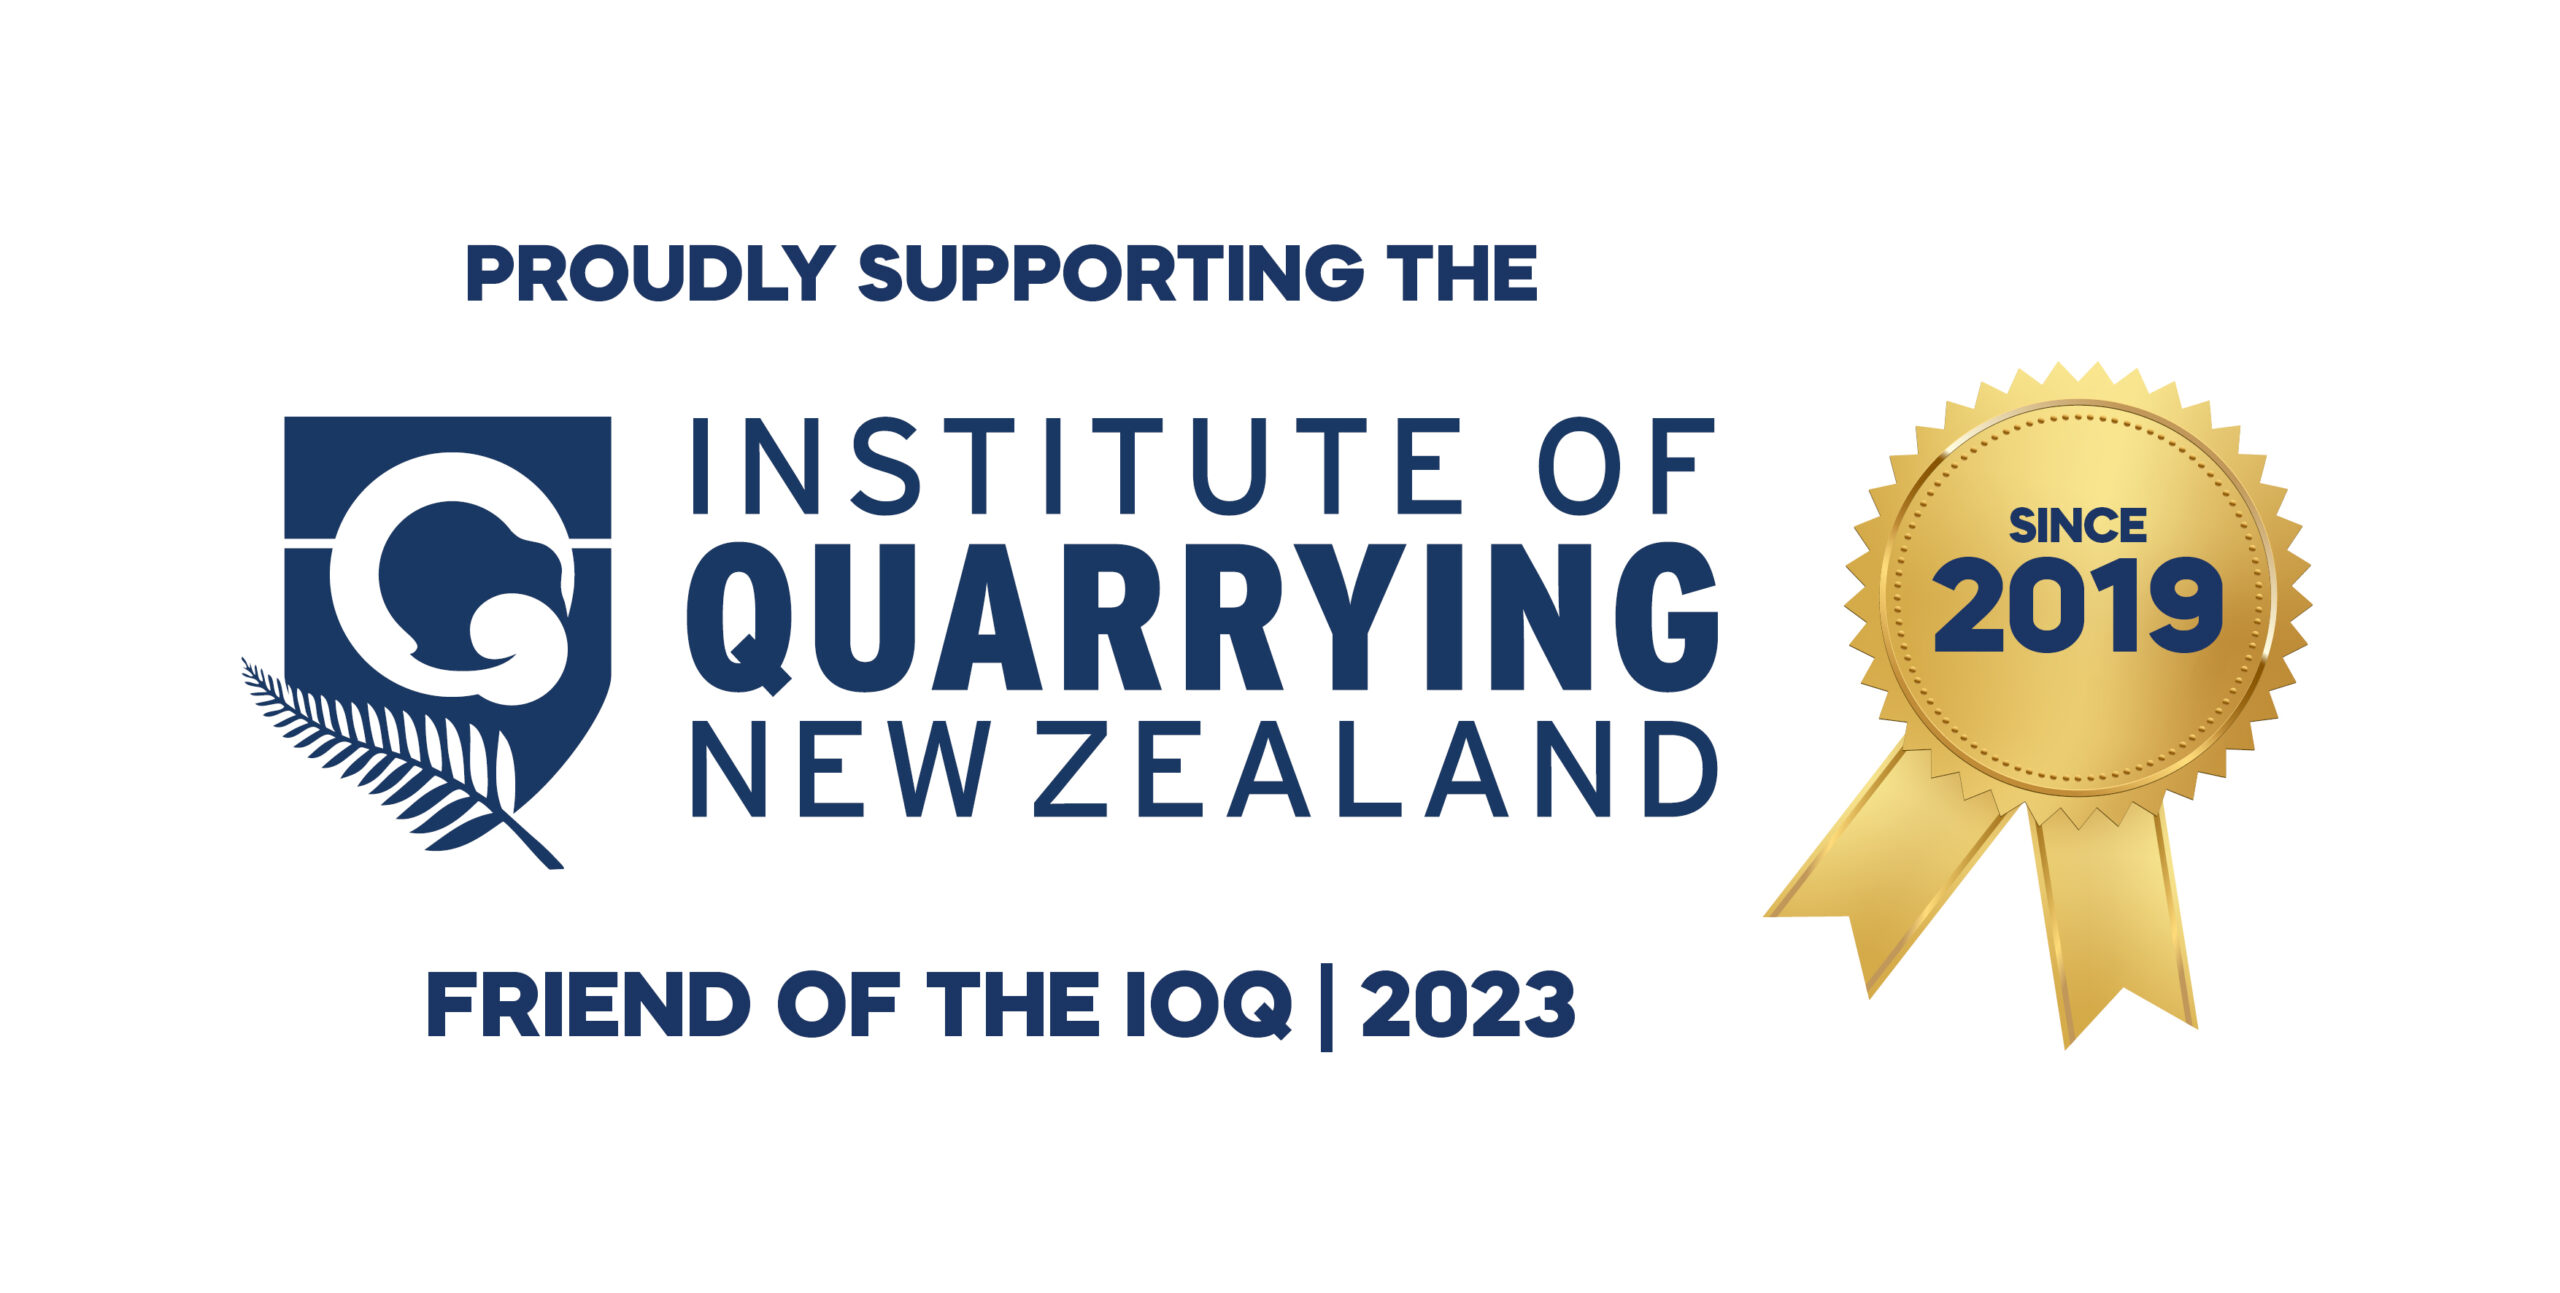 HG Leach | Supporting Institute of Quarrying NZ